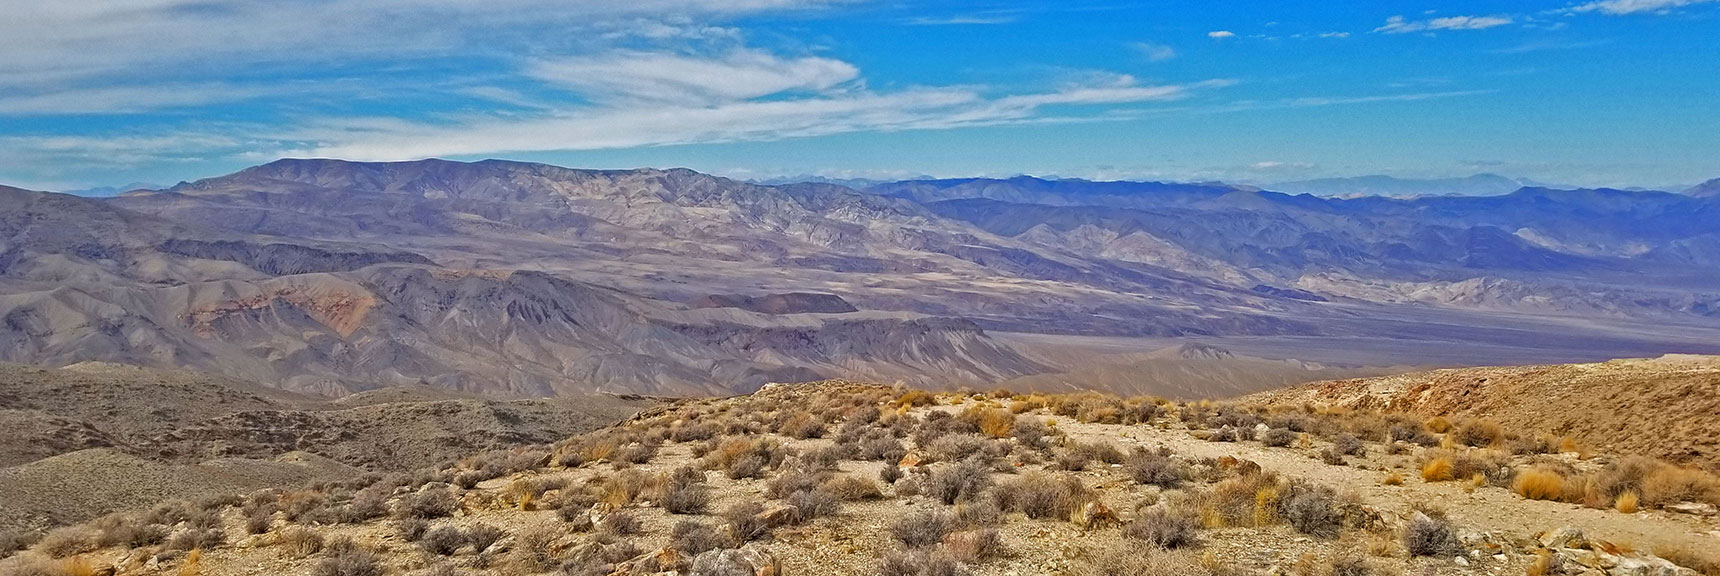 View Down to Emigrant Canyon Area | Skidoo Stamp Mill, Panamint Mountains, Death Valley National Park, CA